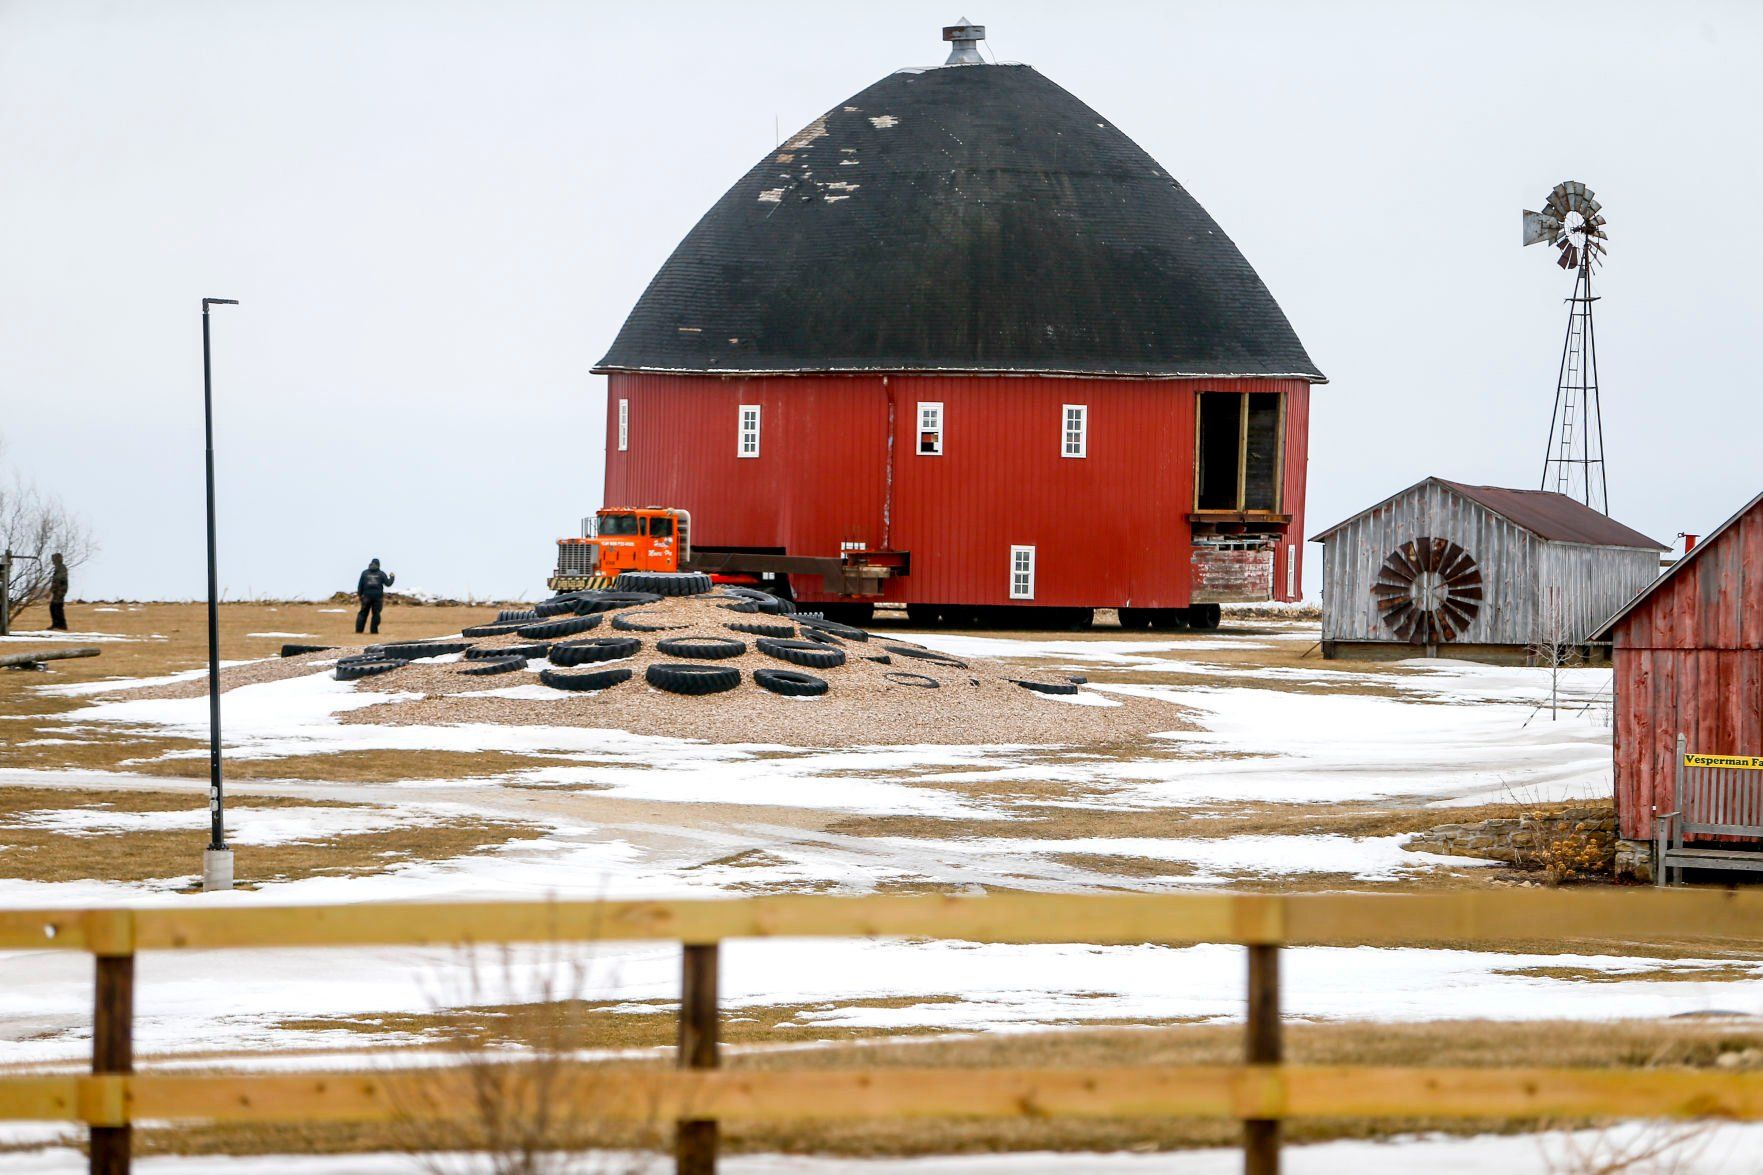 A 60-foot round barn arrives at its new home at Vesperman Farms in Lancaster, Wis., on Thursday. The barn had been relocated from a site several miles away in a rural area.    PHOTO CREDIT: Dave Kettering